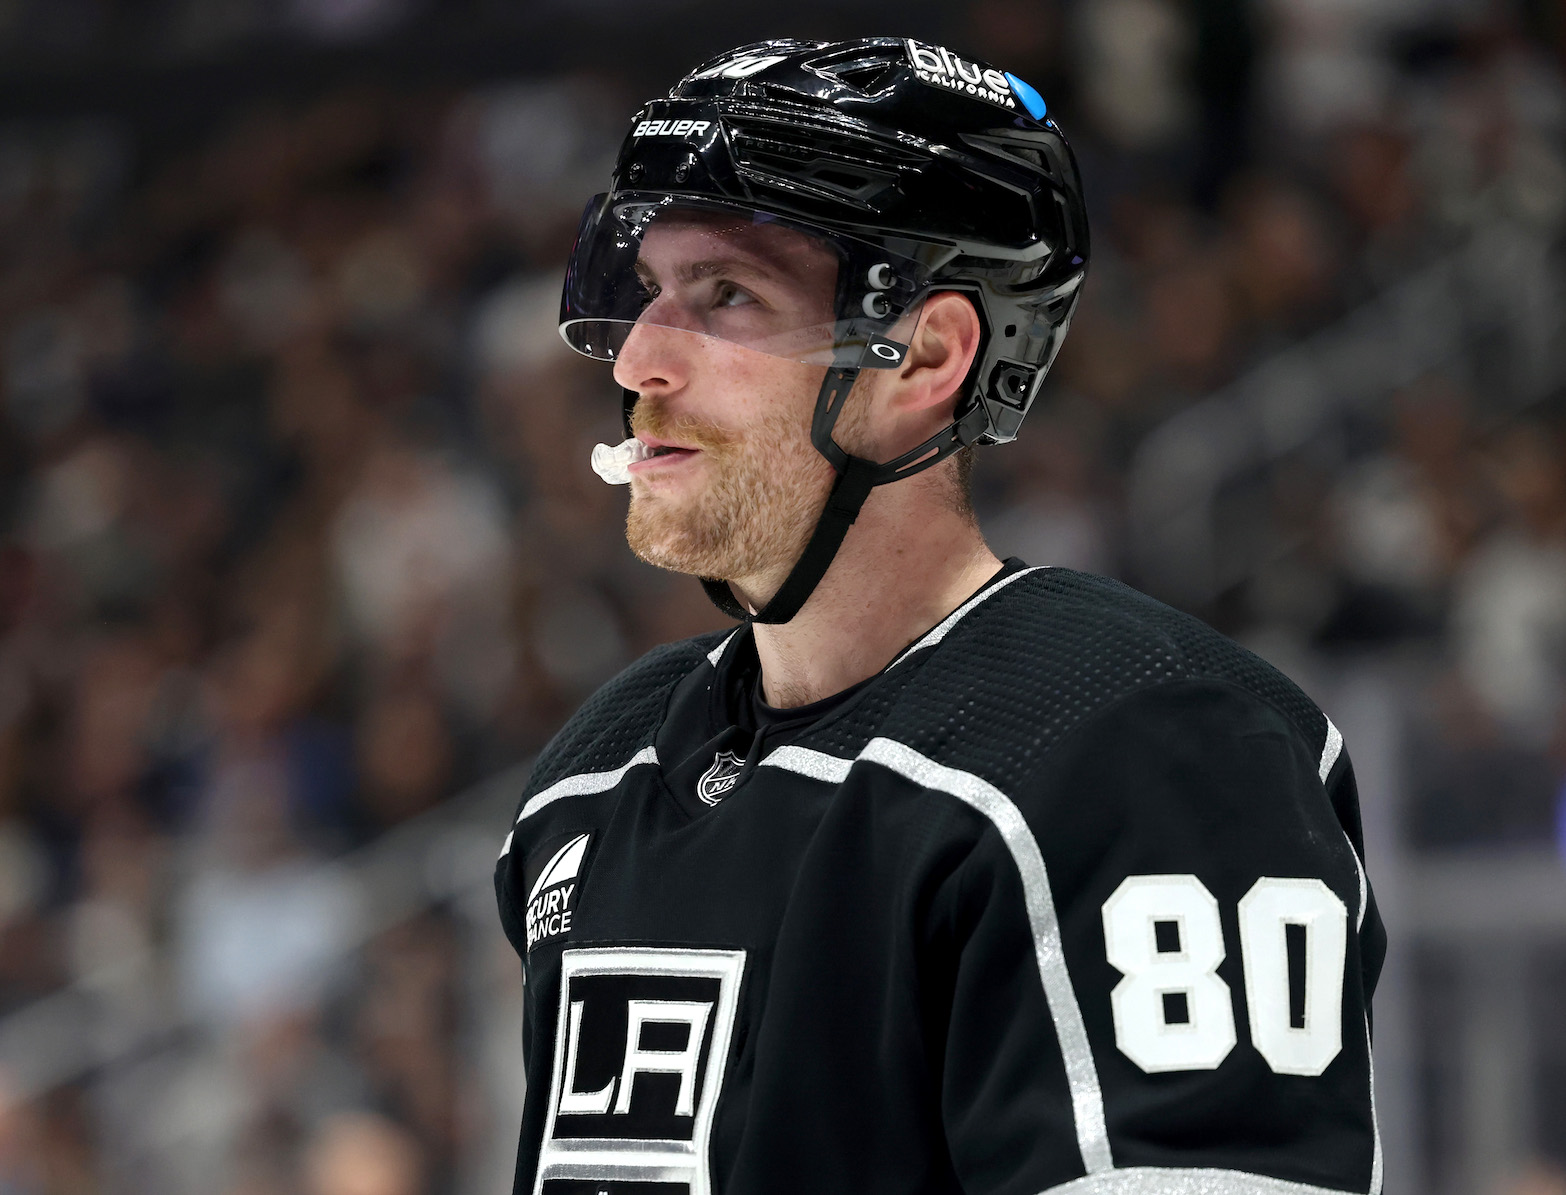 Los Angeles Kings: Top 3 young players to watch next season